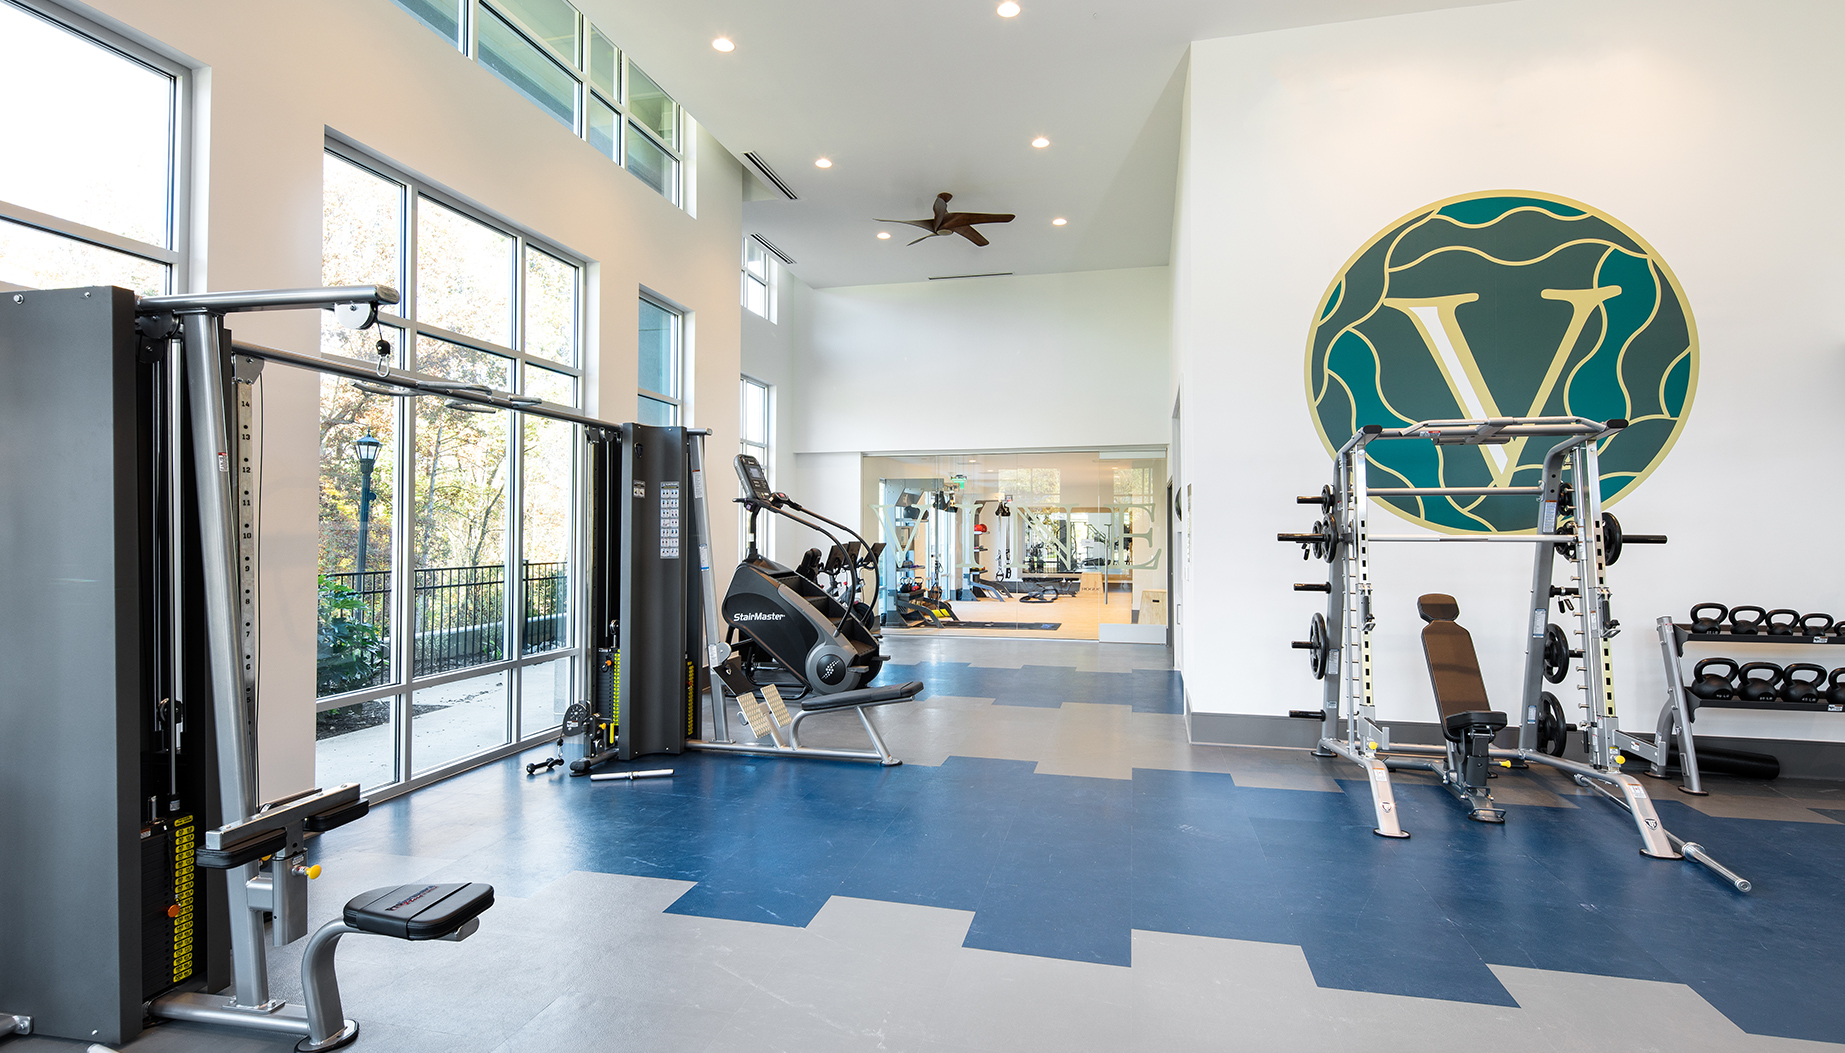 Vine North Hills fitness center with Vine logo on the wall, smith machine, and the stairmaster